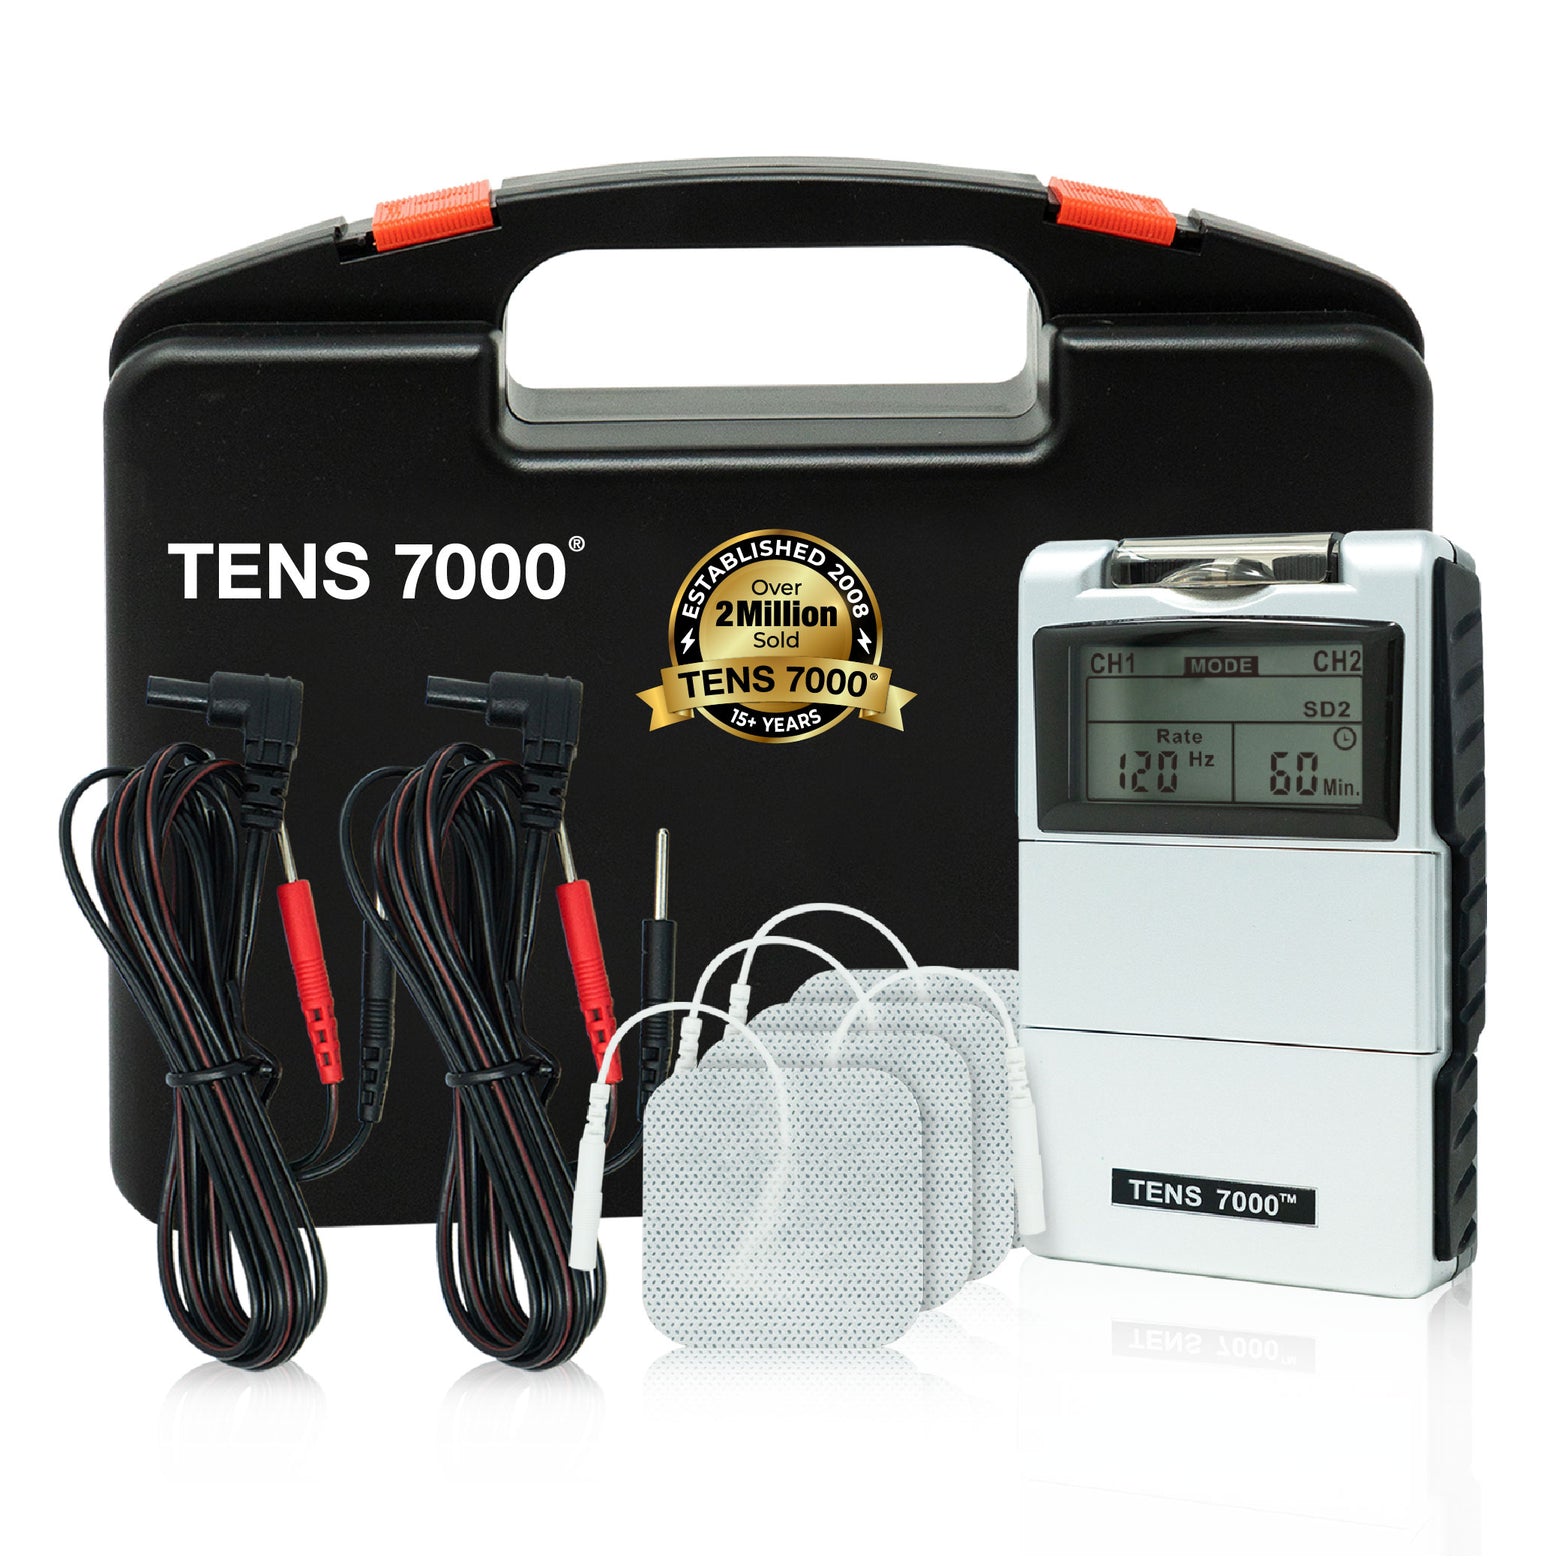 Roscoe Medical Tens 7000 2nd Edition Digital Tens Unit with Accessories-OTC, Size: 8.8 x 2 x 7.8, Silver